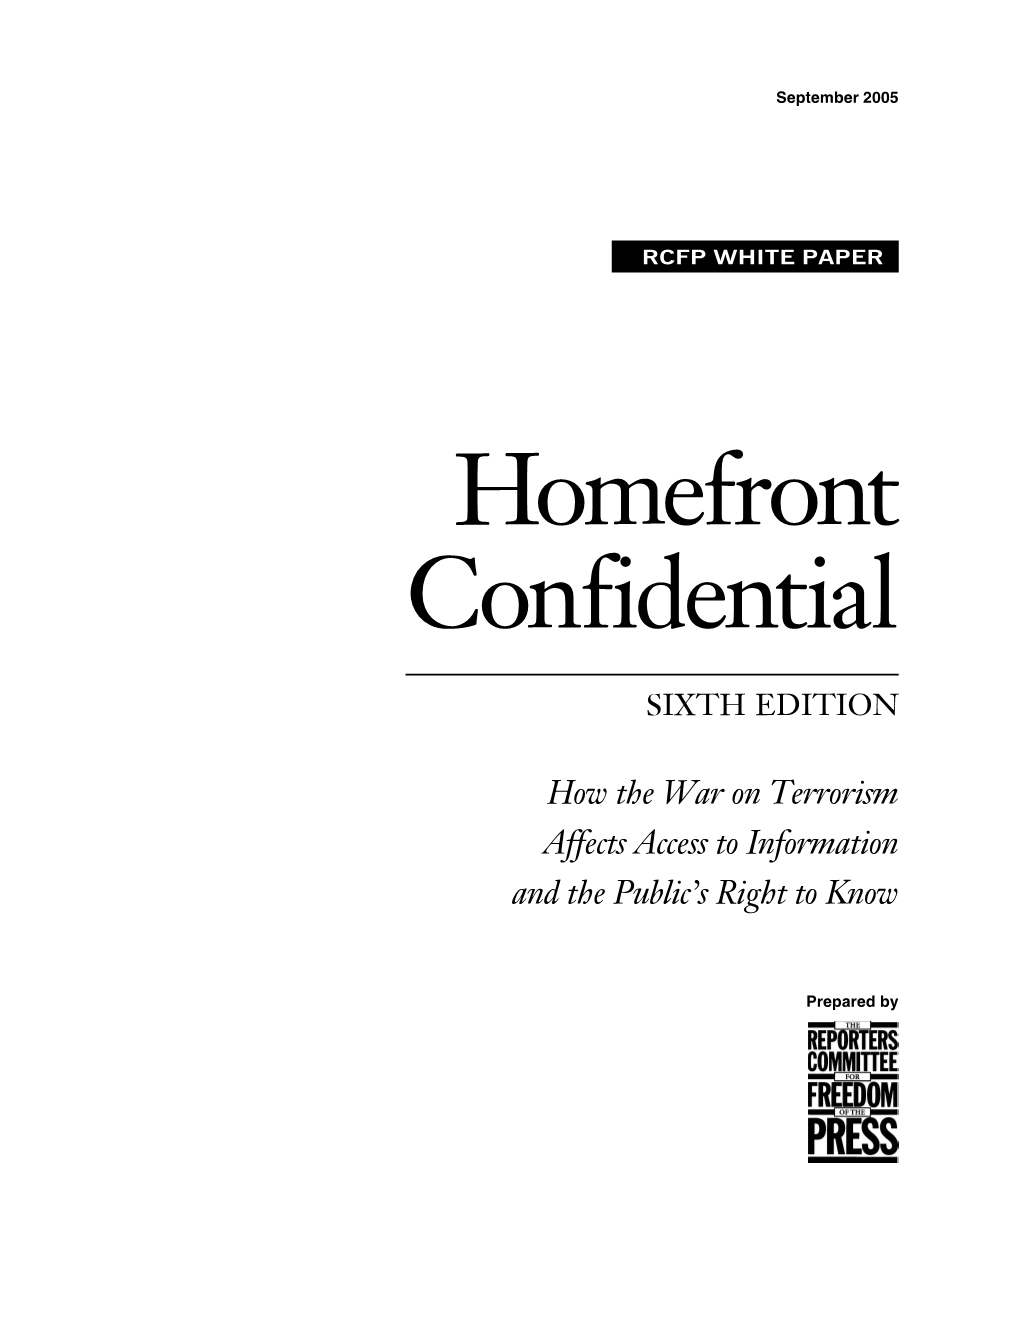 Homefront Confidential